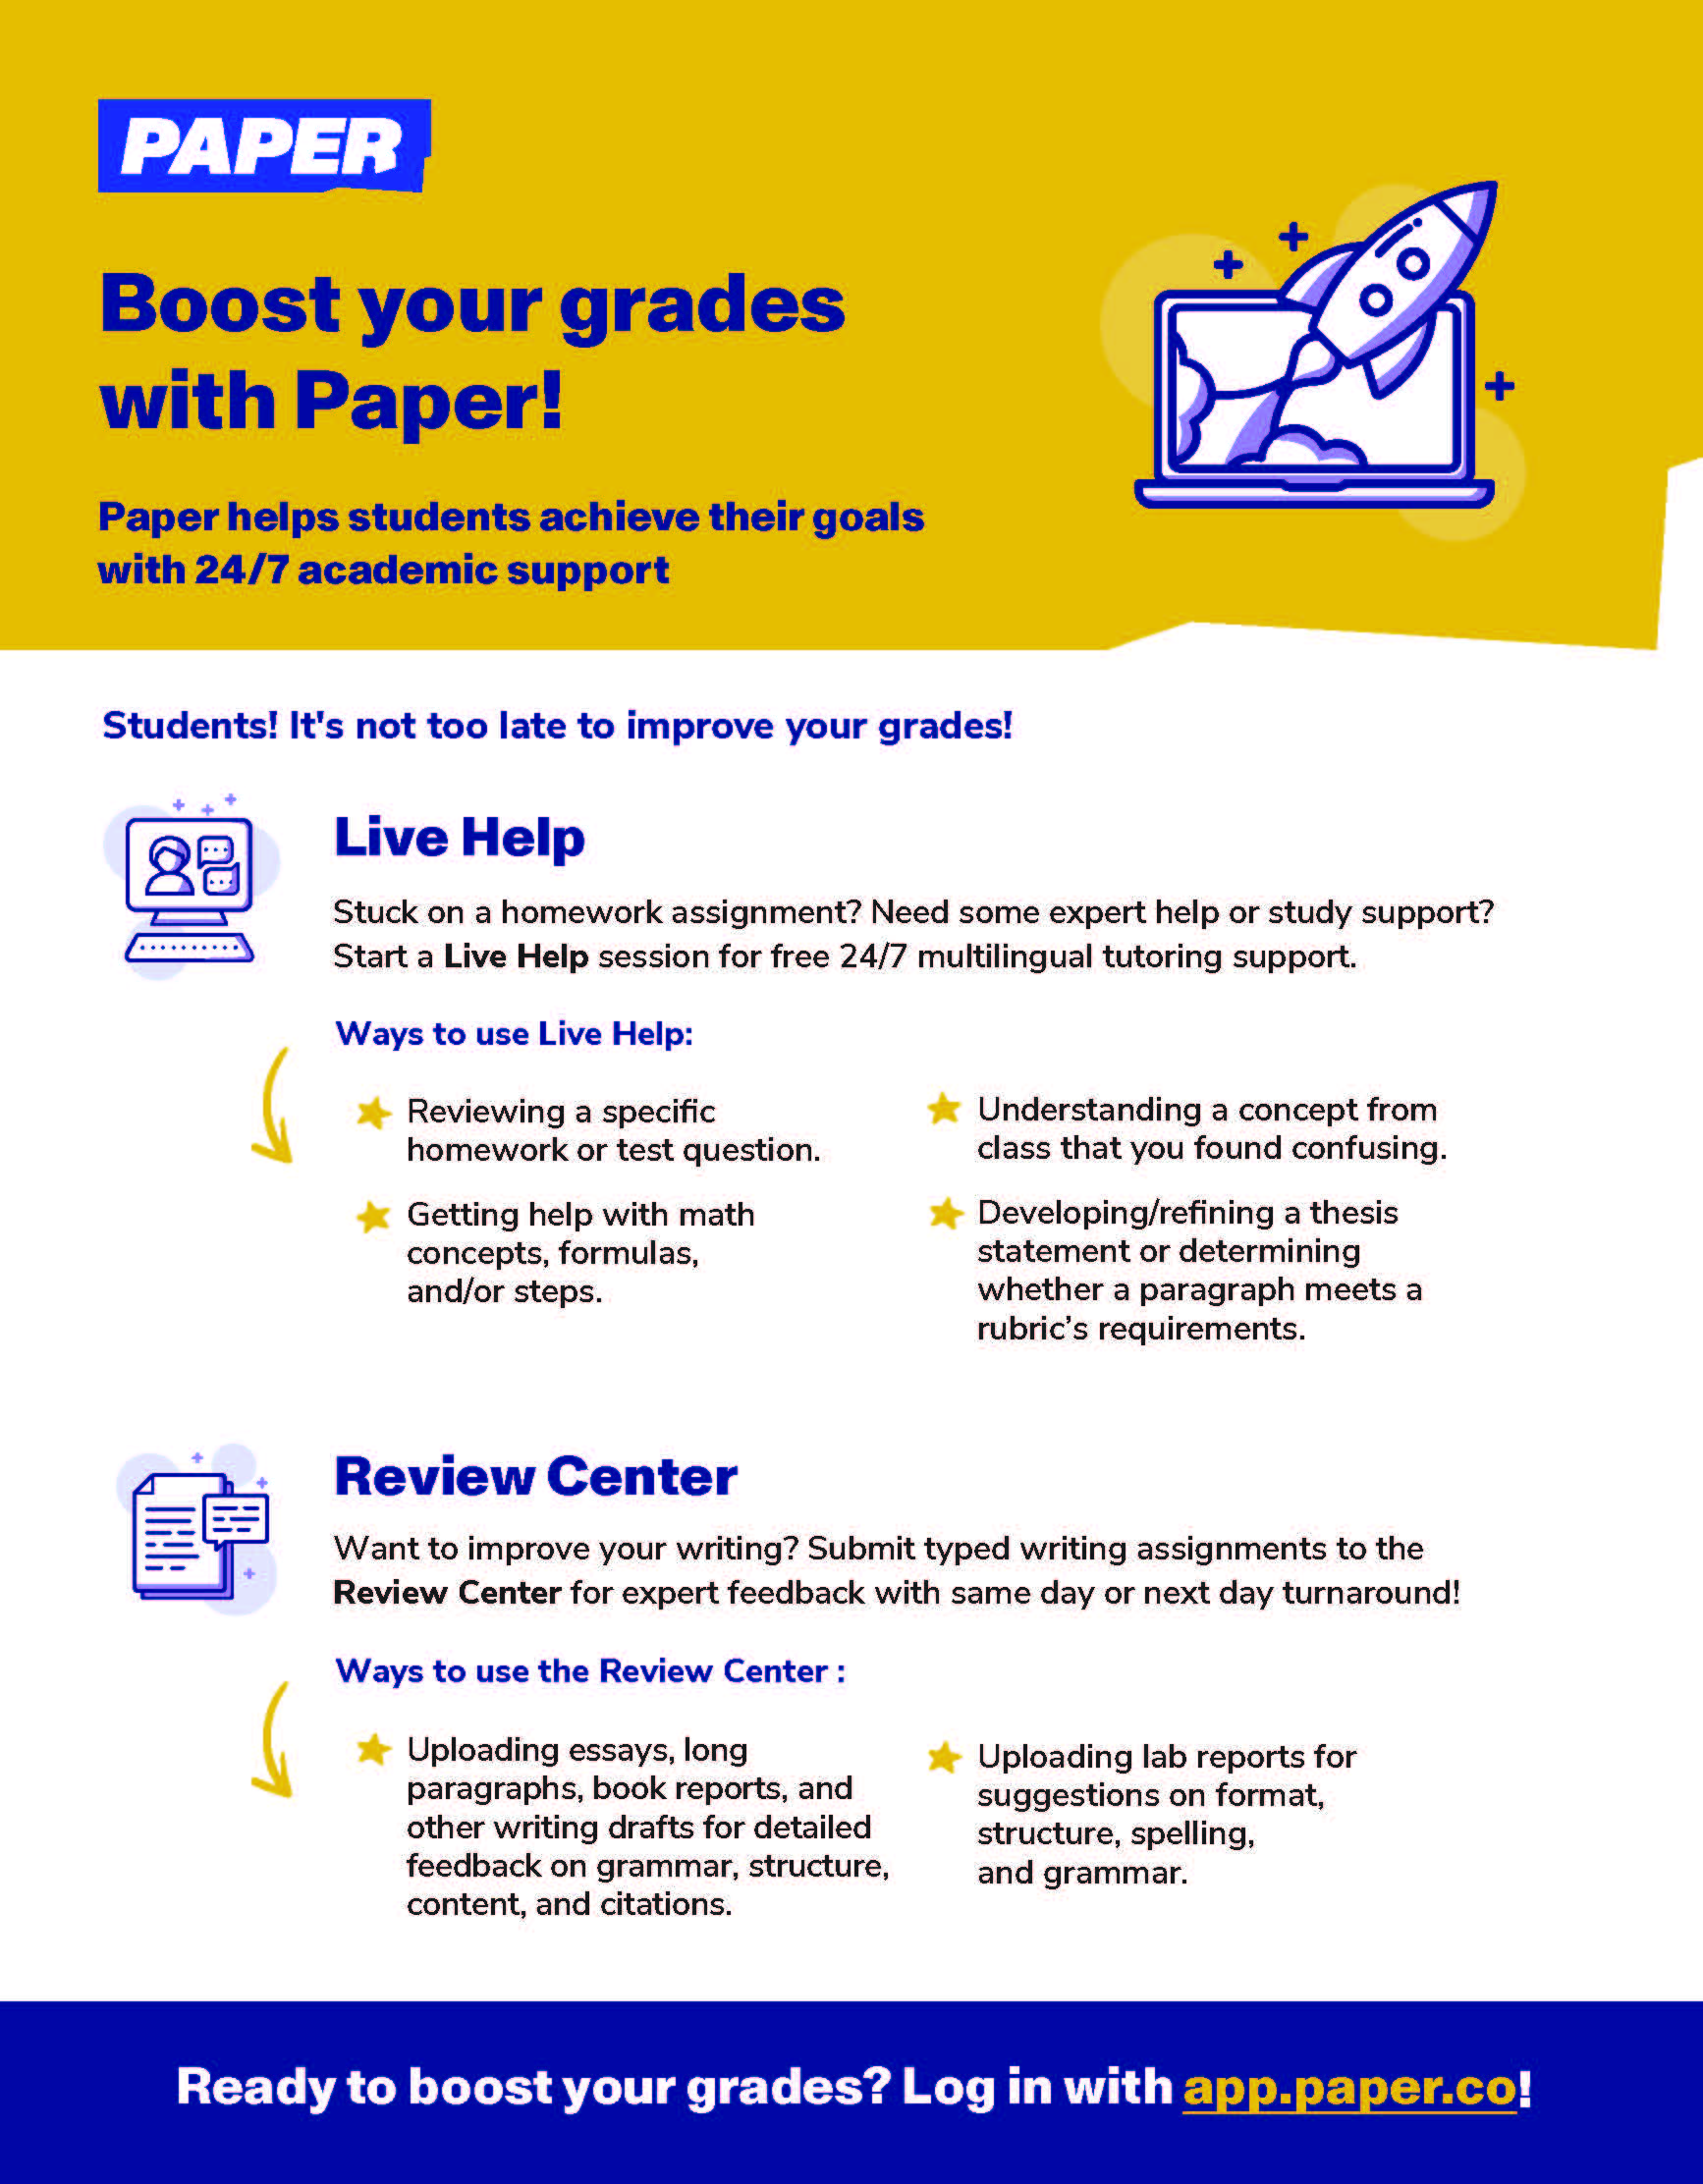 Boost Your Grades pager-paper-login (1).jpg